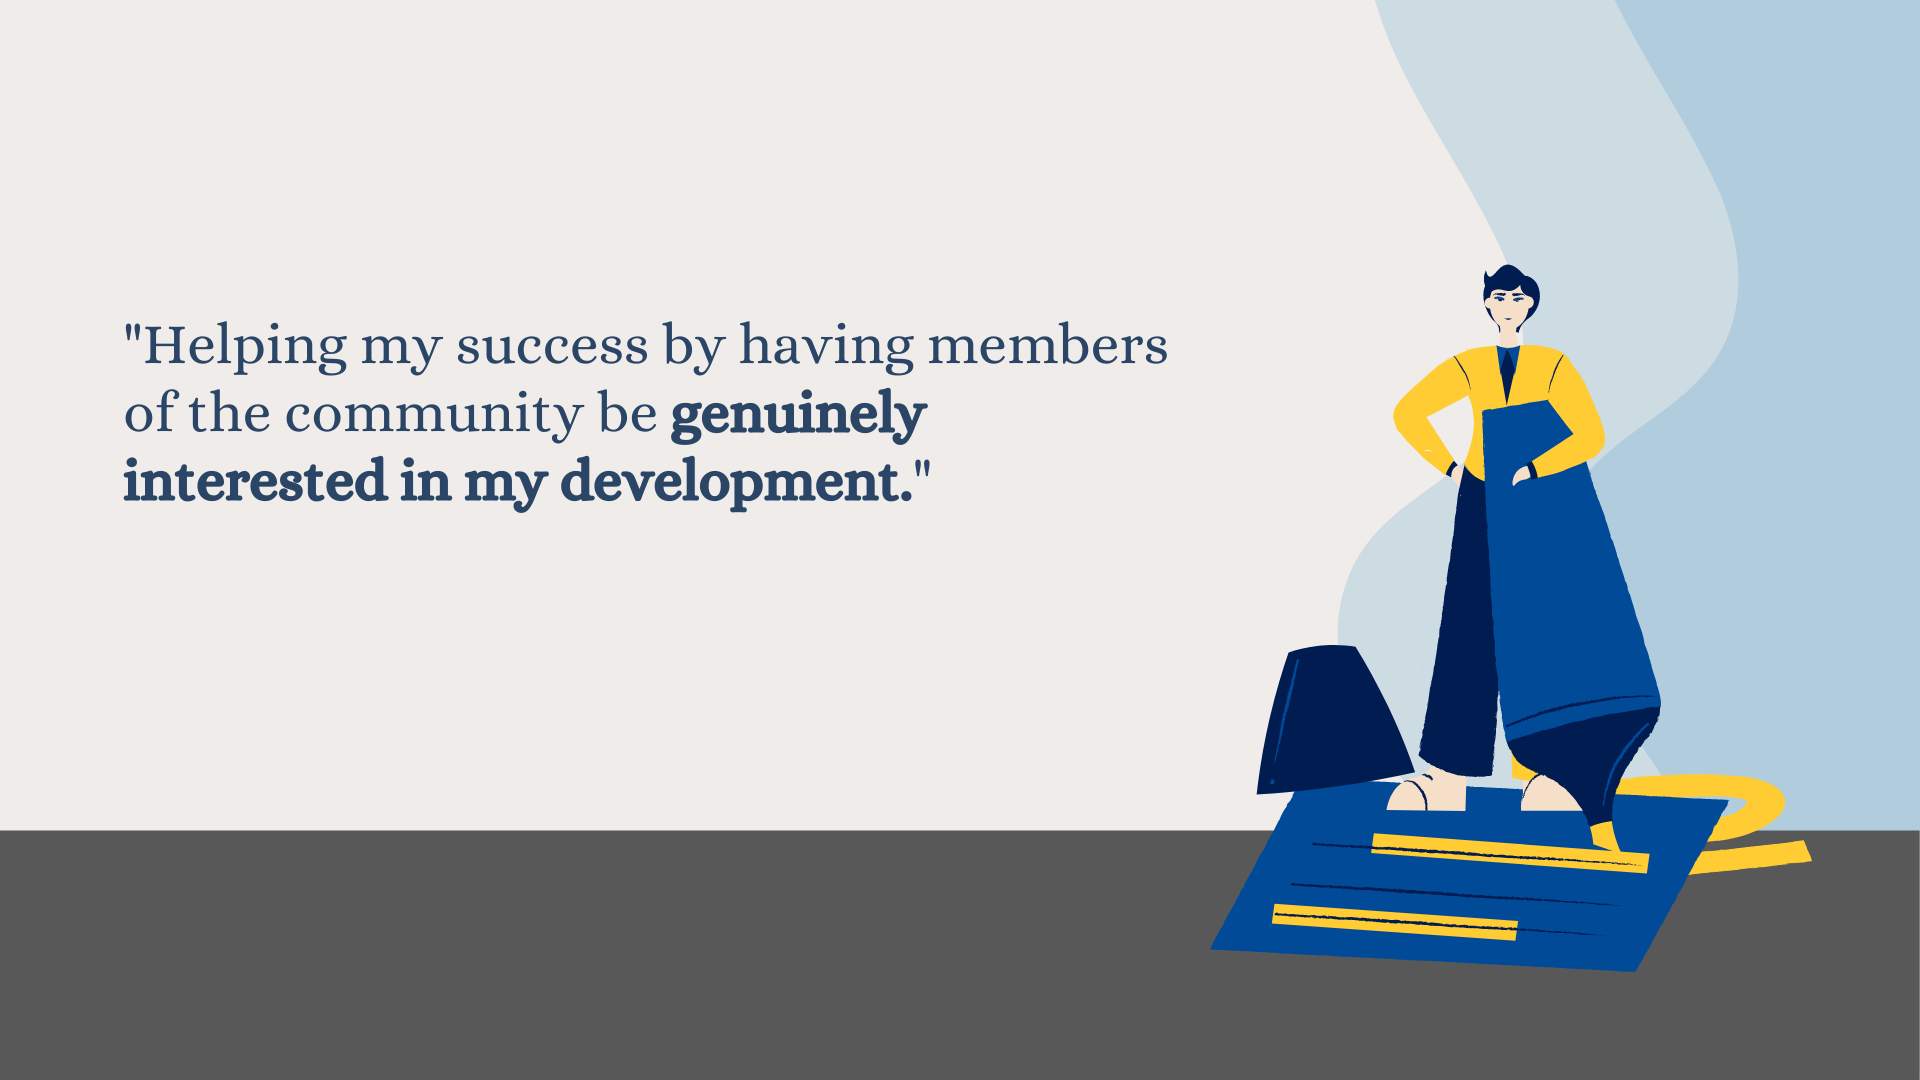 Image with the text "Helping my success by having members of the community be genuinely interested in my development."